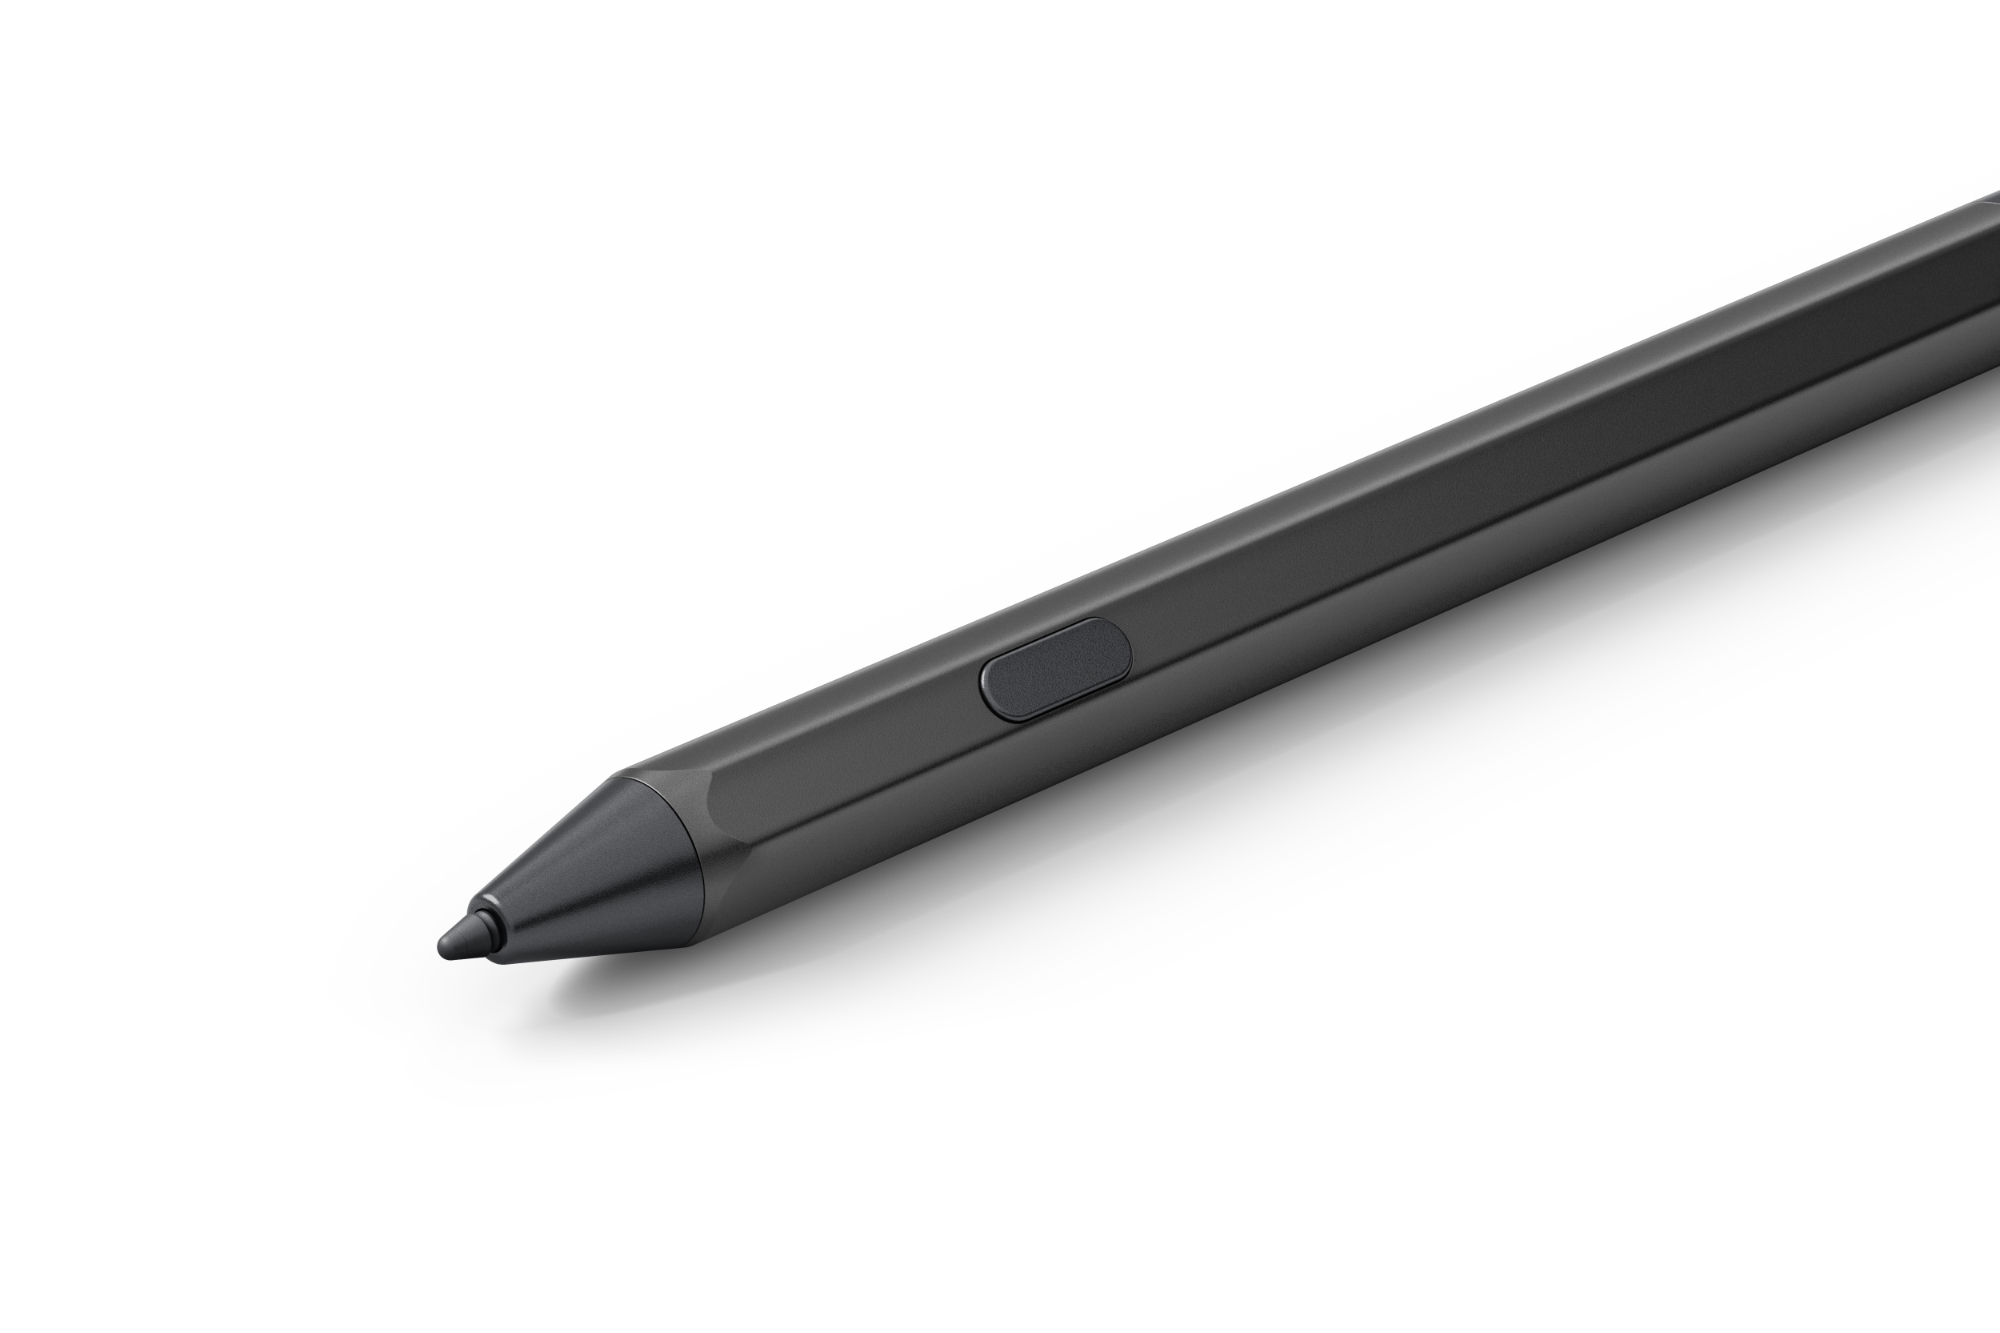 The stylus accessory for the Amazon Fire Max 11 tablet.